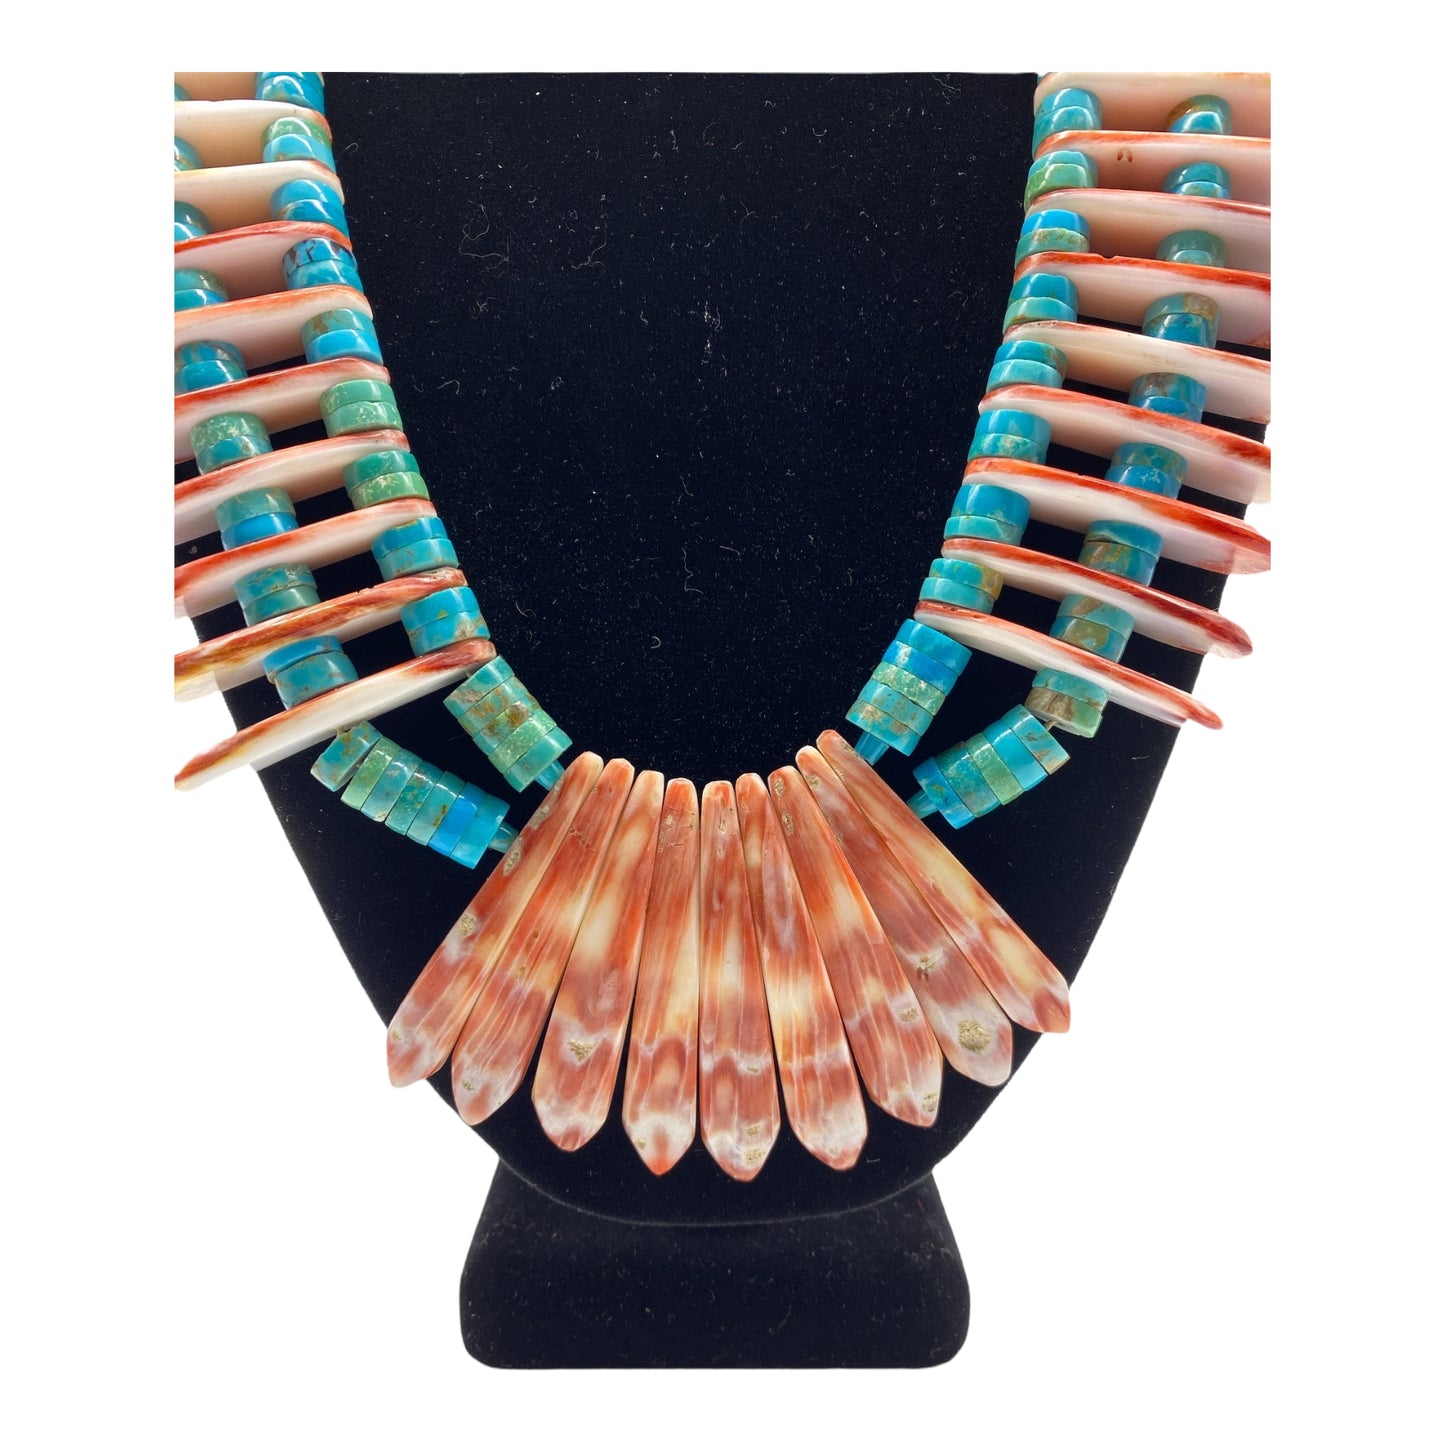 Santo Domingo Turquoise and Spiny Oyster Necklace